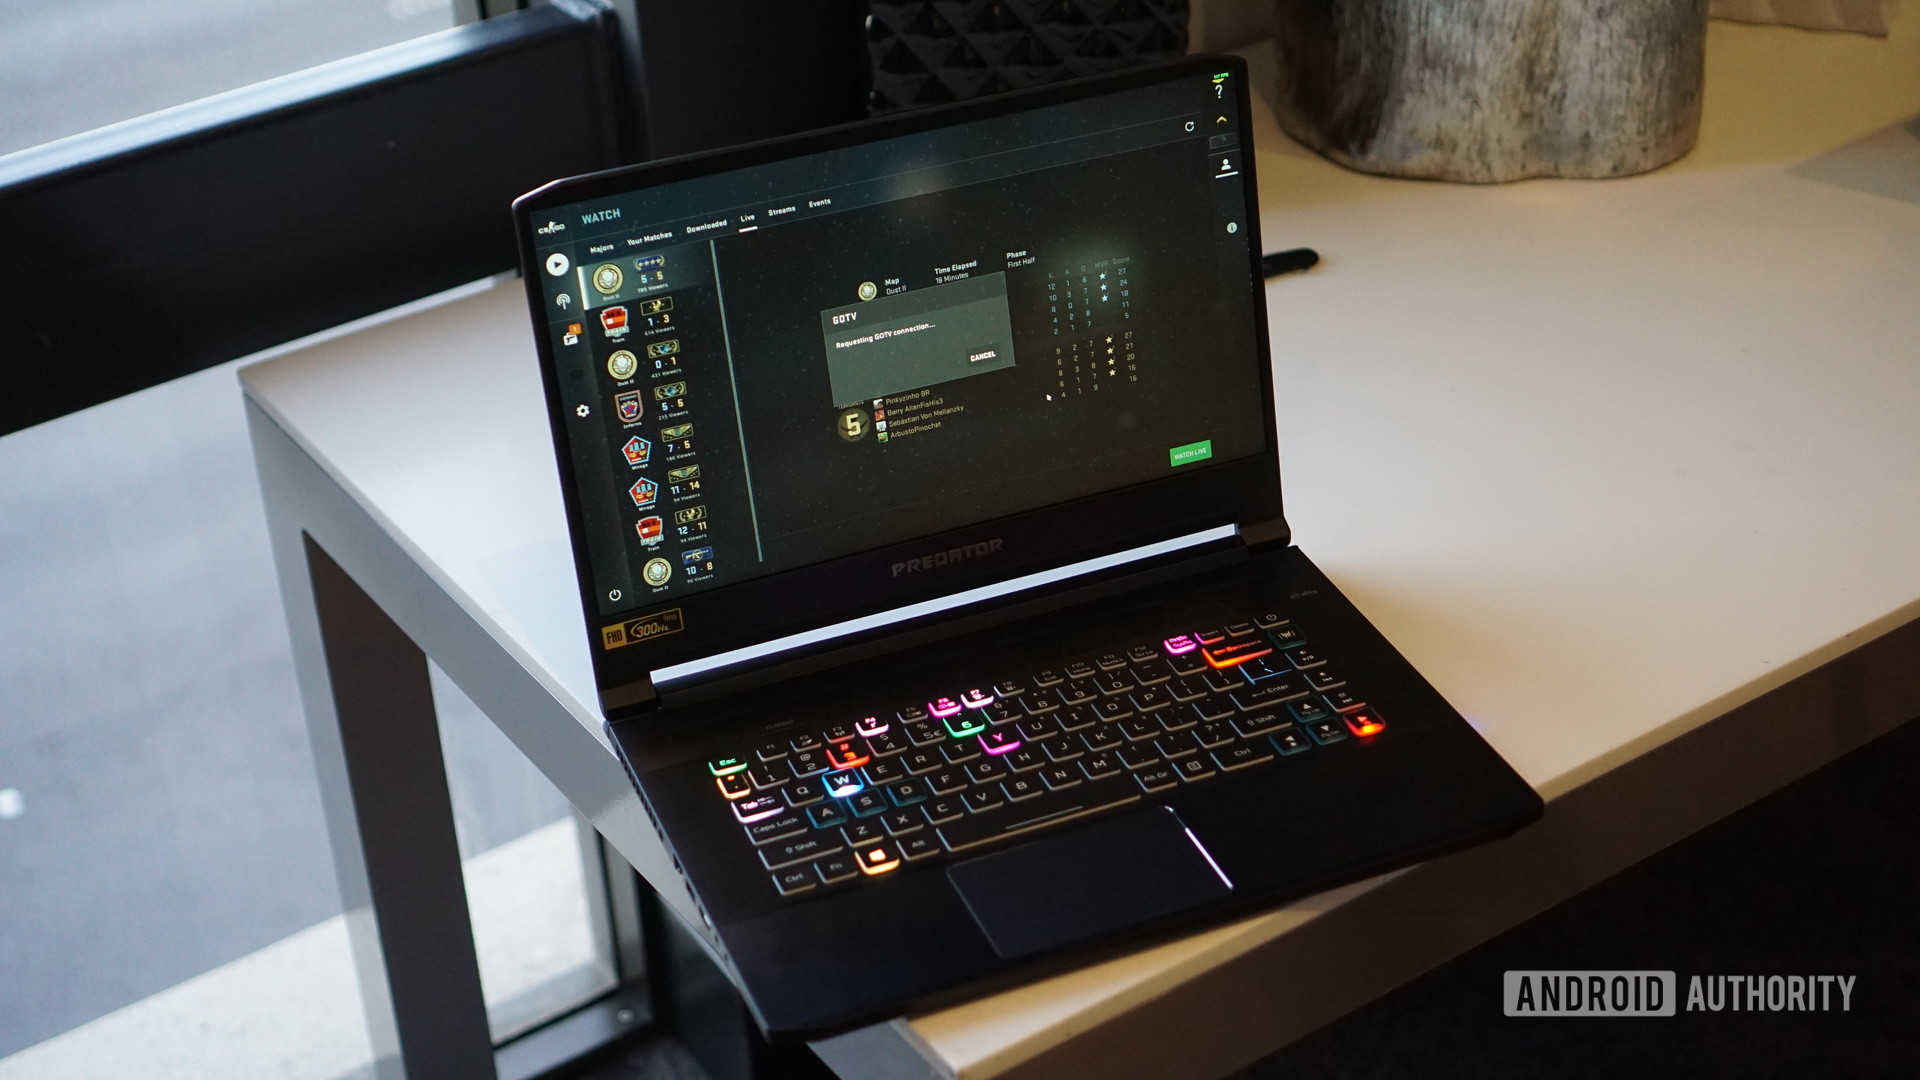 The Acer Predator laptop on the desktop turns on and displays an RGB backlit keyboard.